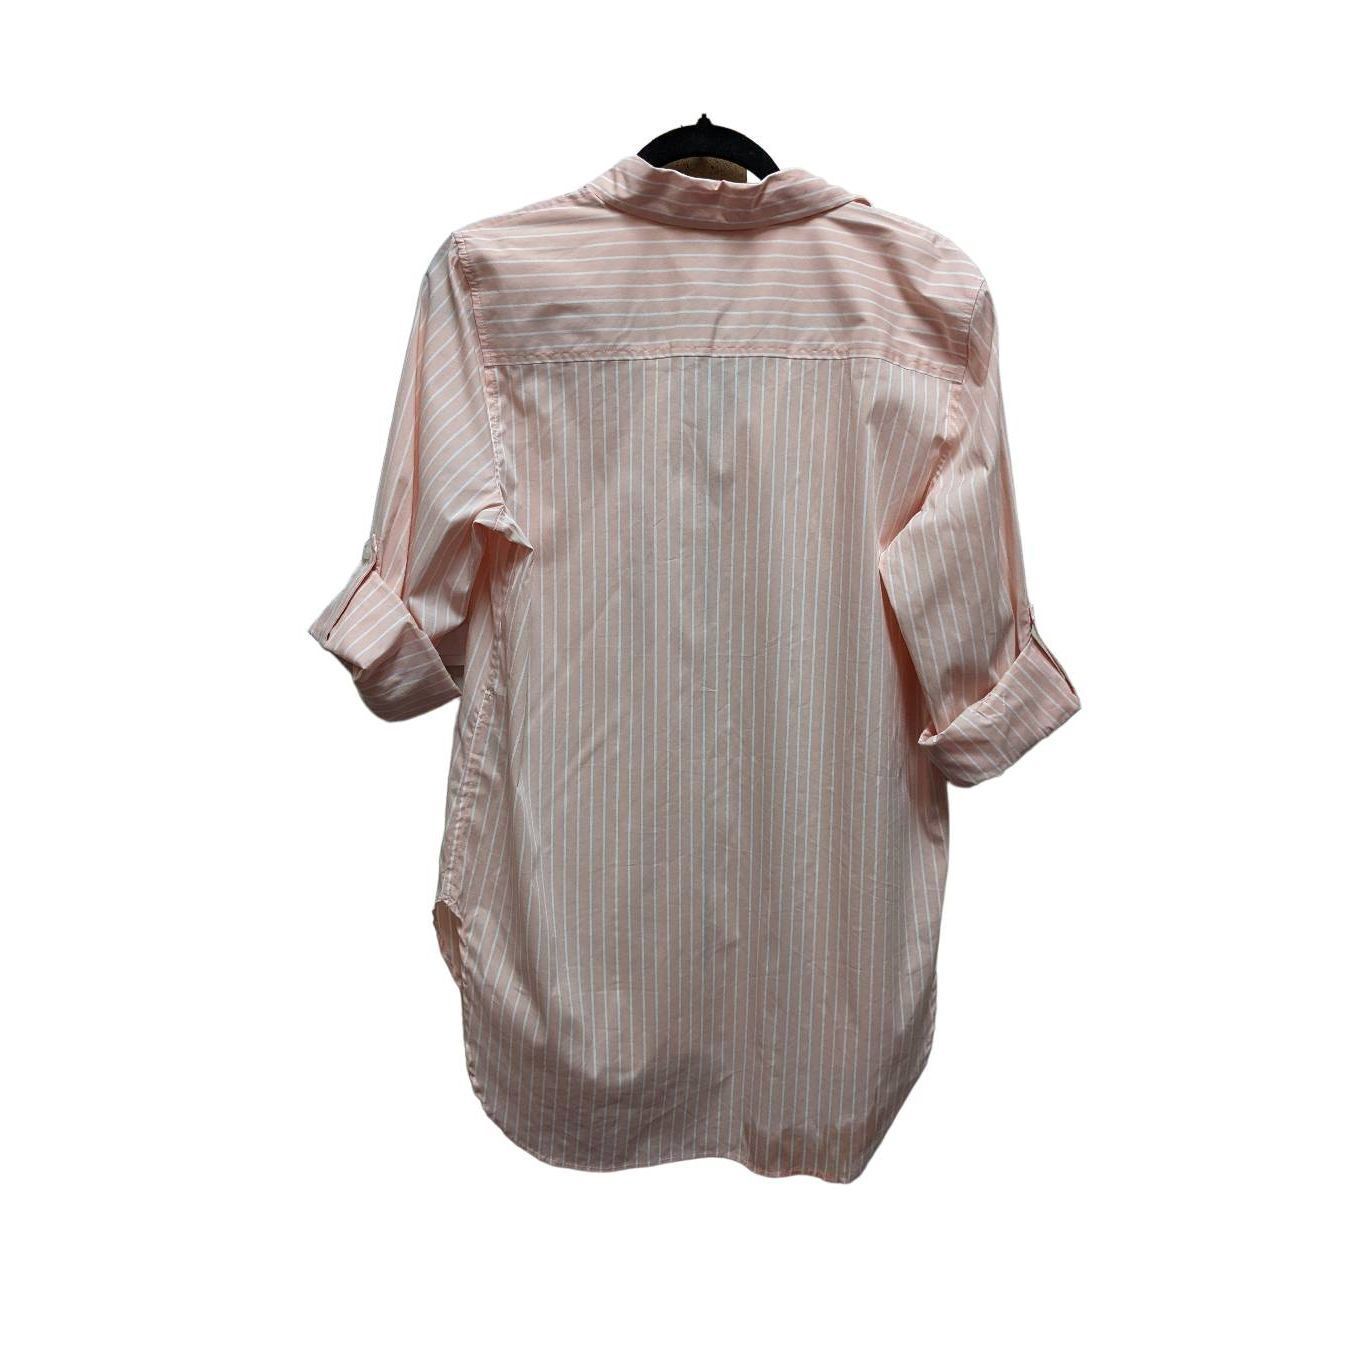 Calvin Klein Calvin Klein Women's Pink and White Striped Dress Shirt With Size M / US 6-8 / IT 42-44 - 2 Preview